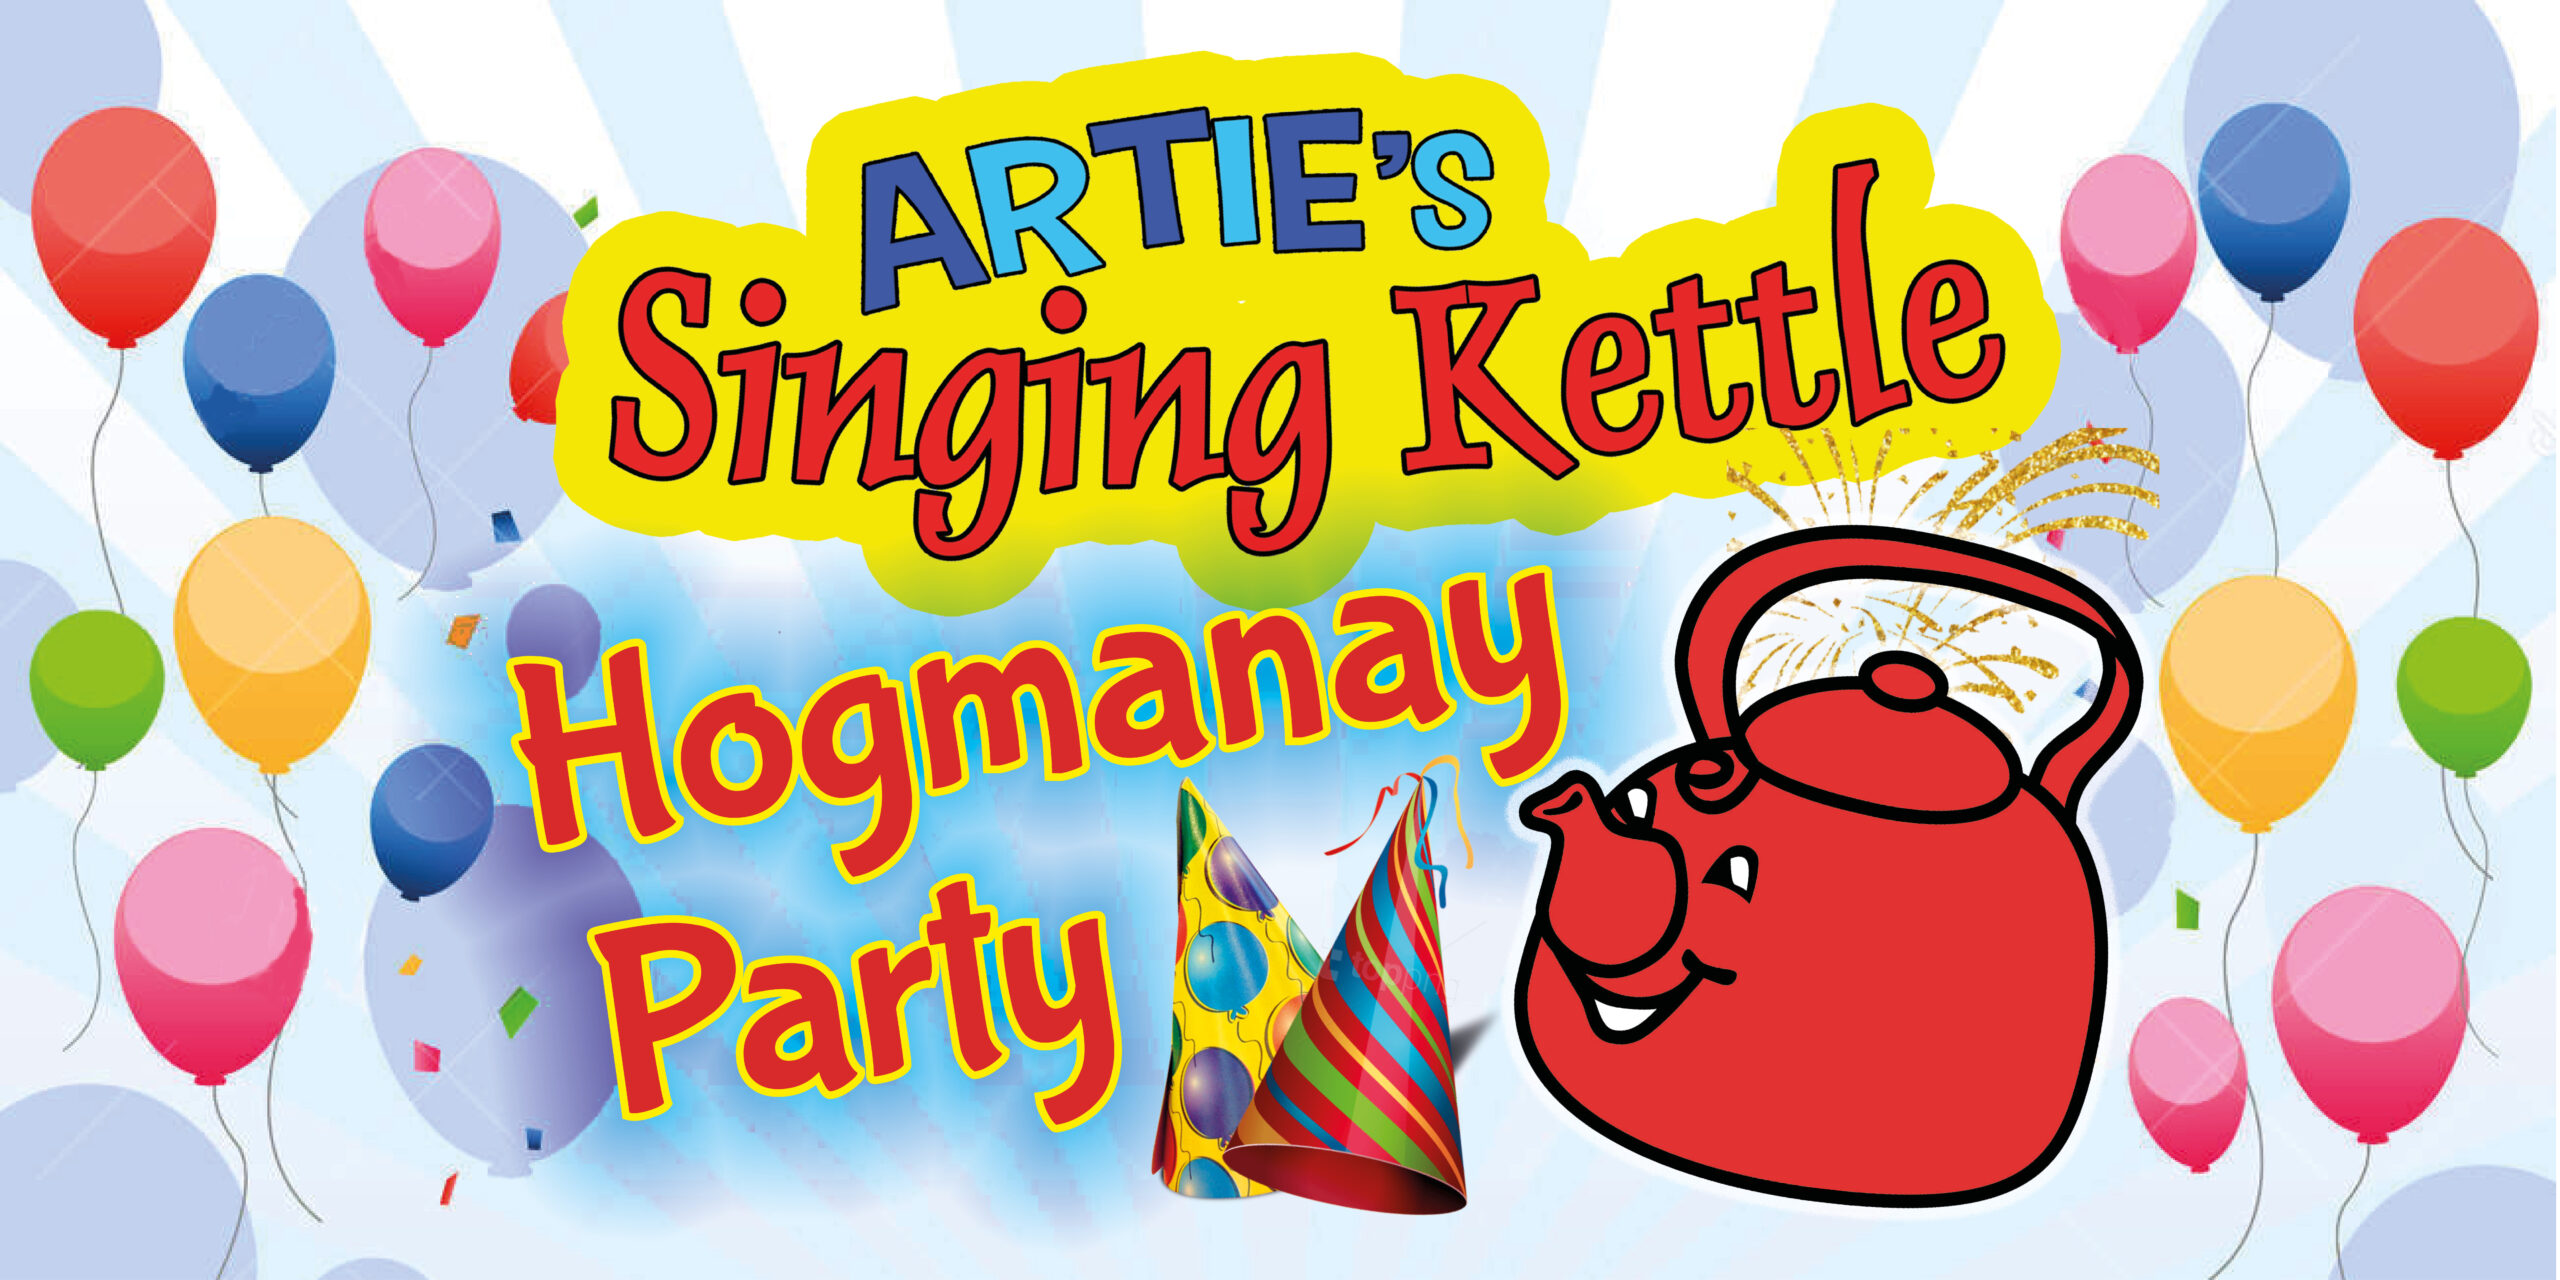 Artie’s Singing Kettle Hogmanay Party